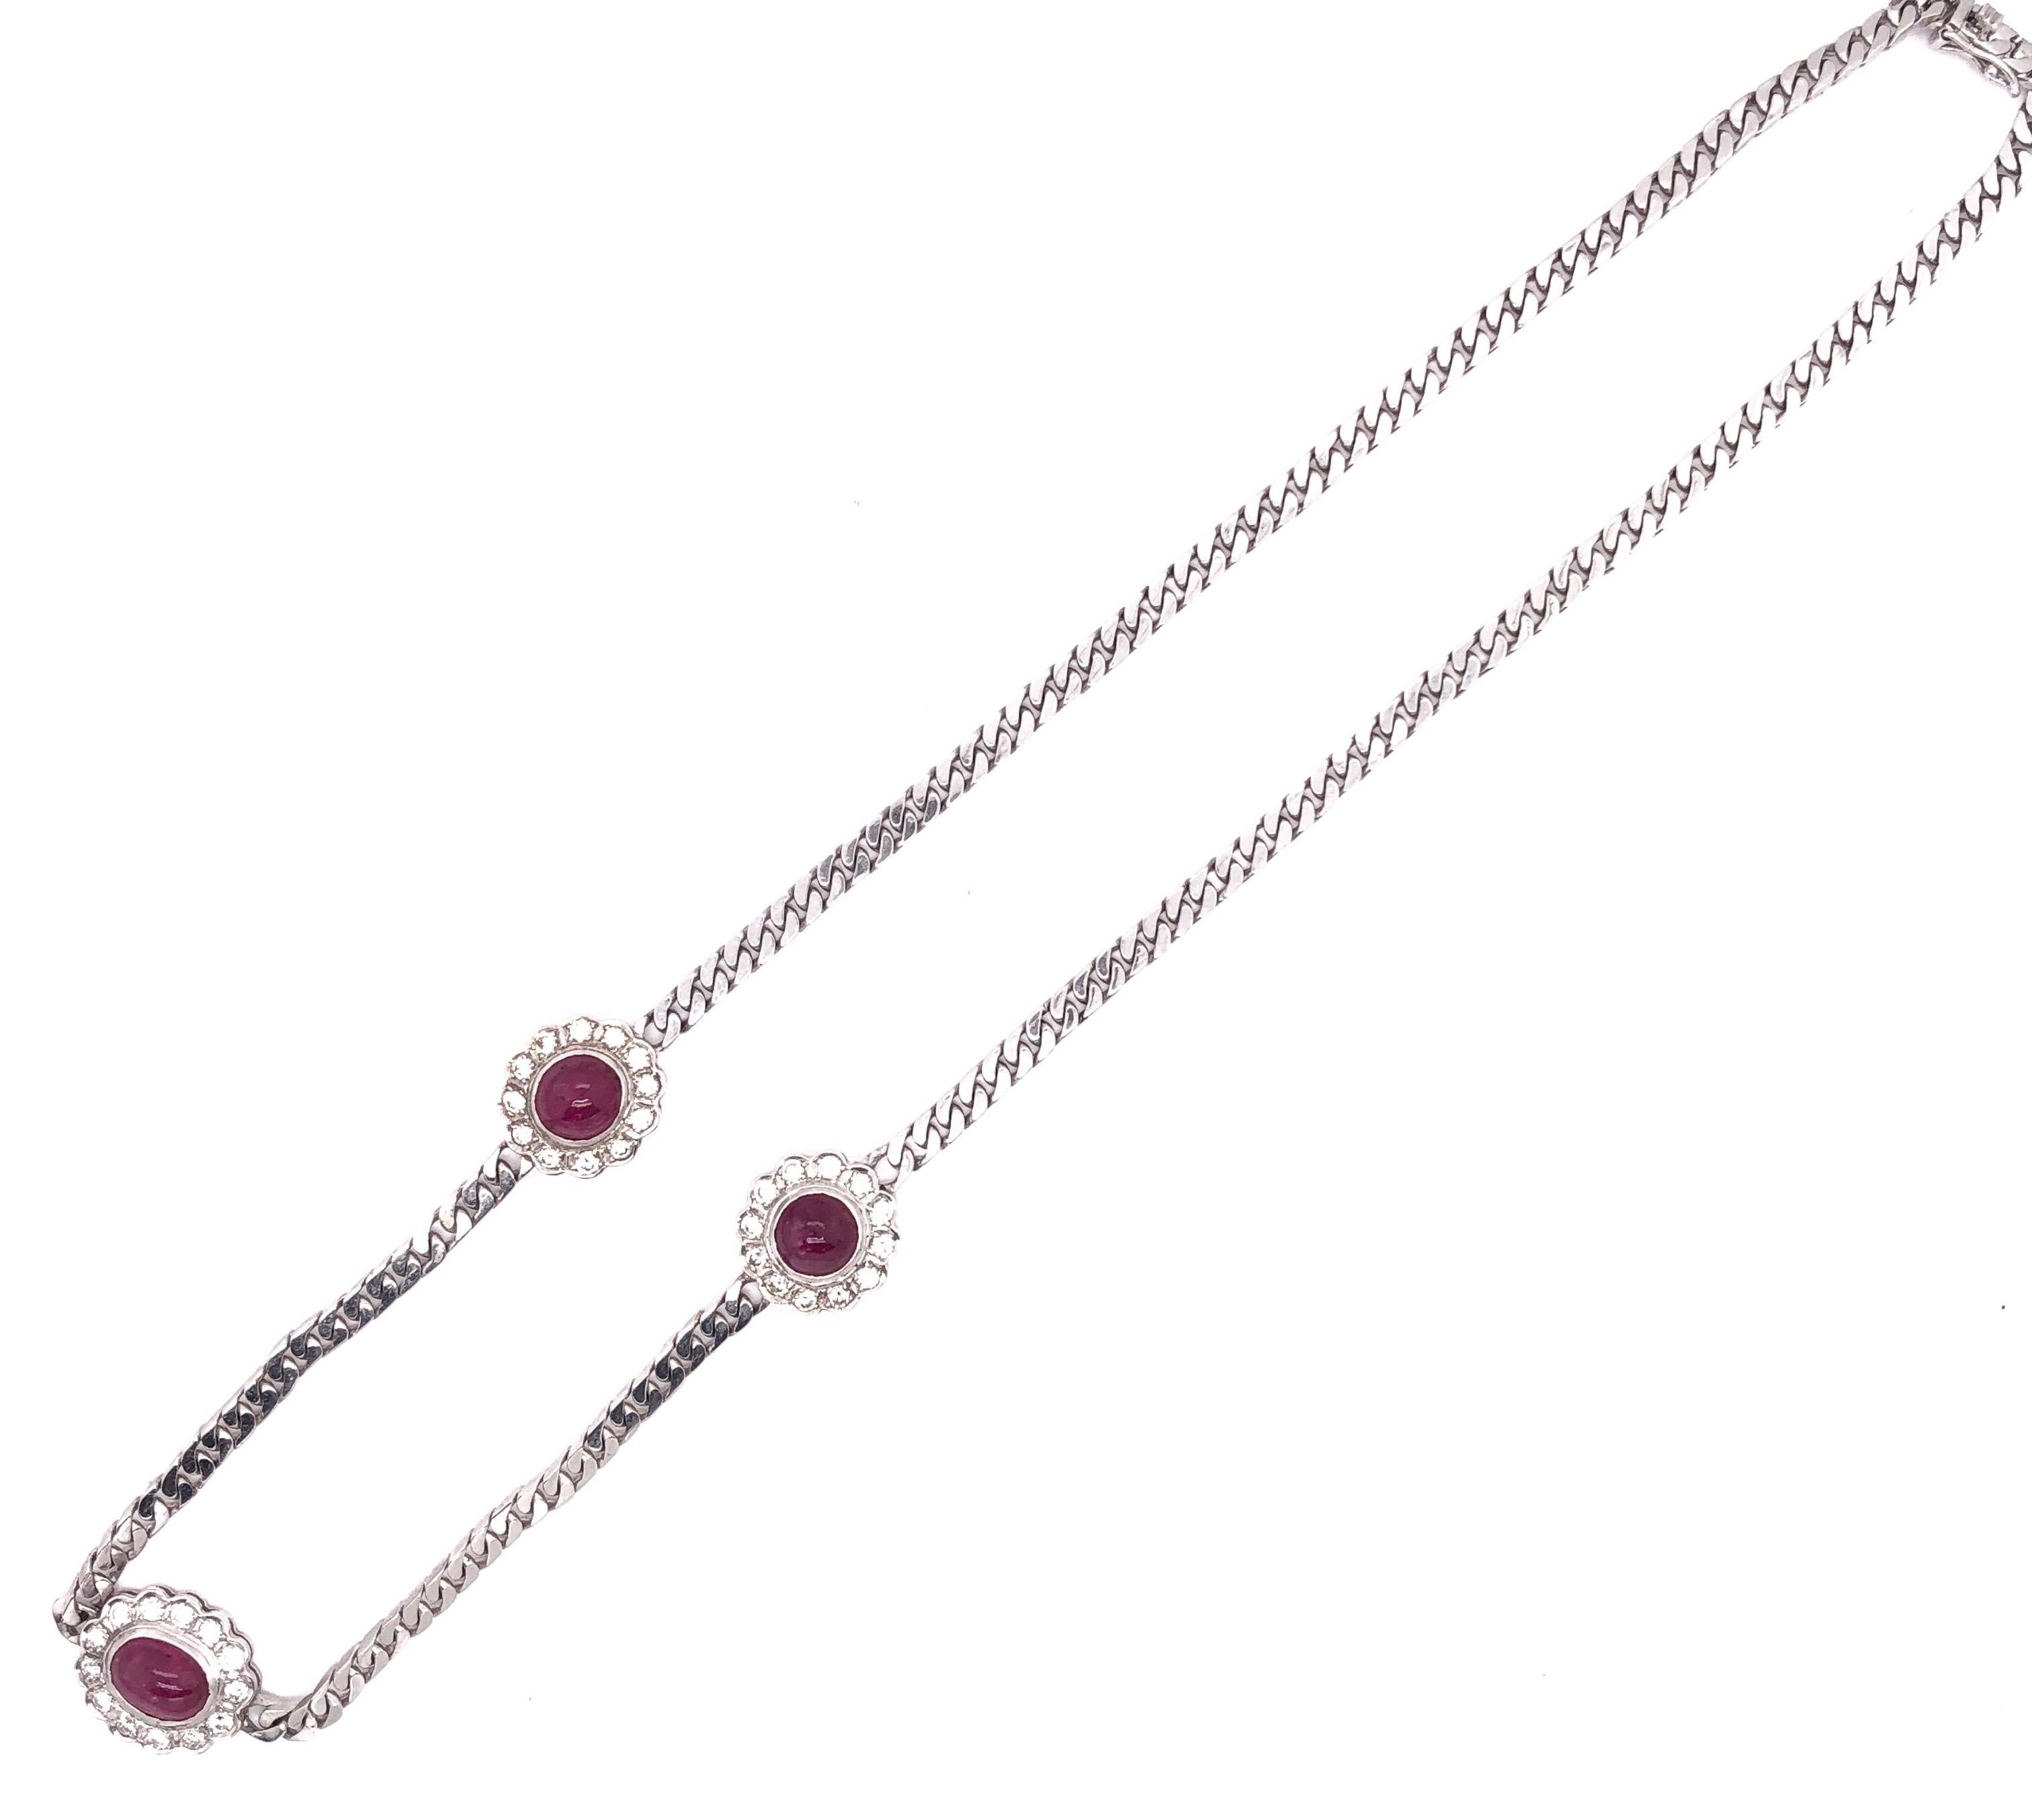 14 Karat White Gold 16 Inch Figaro Amethyst And Diamond Station Necklace 
15.8 grams total weight.